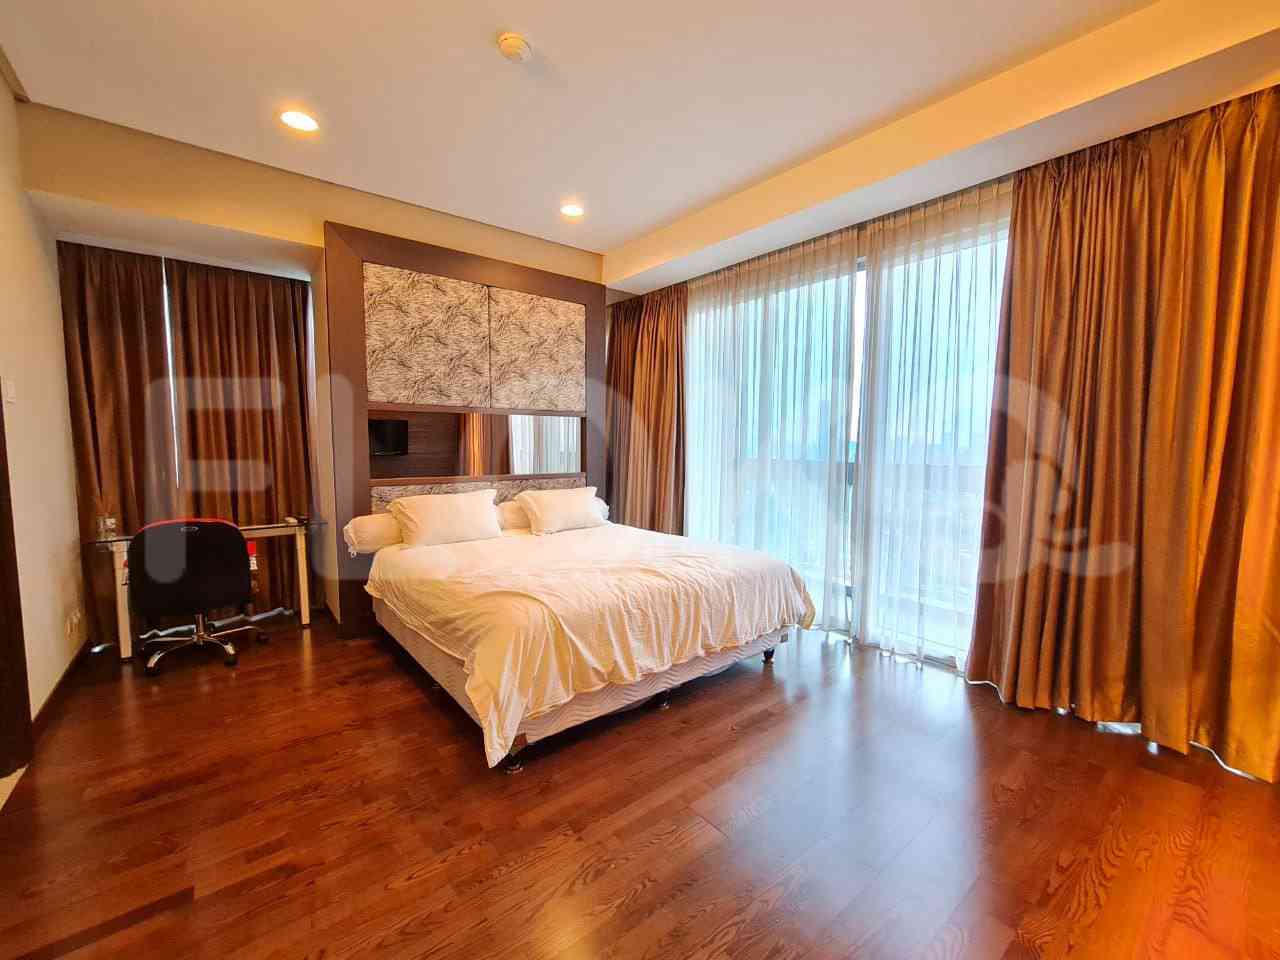 2 Bedroom on 19th Floor for Rent in The Mansion at Kemang - fkee64 3